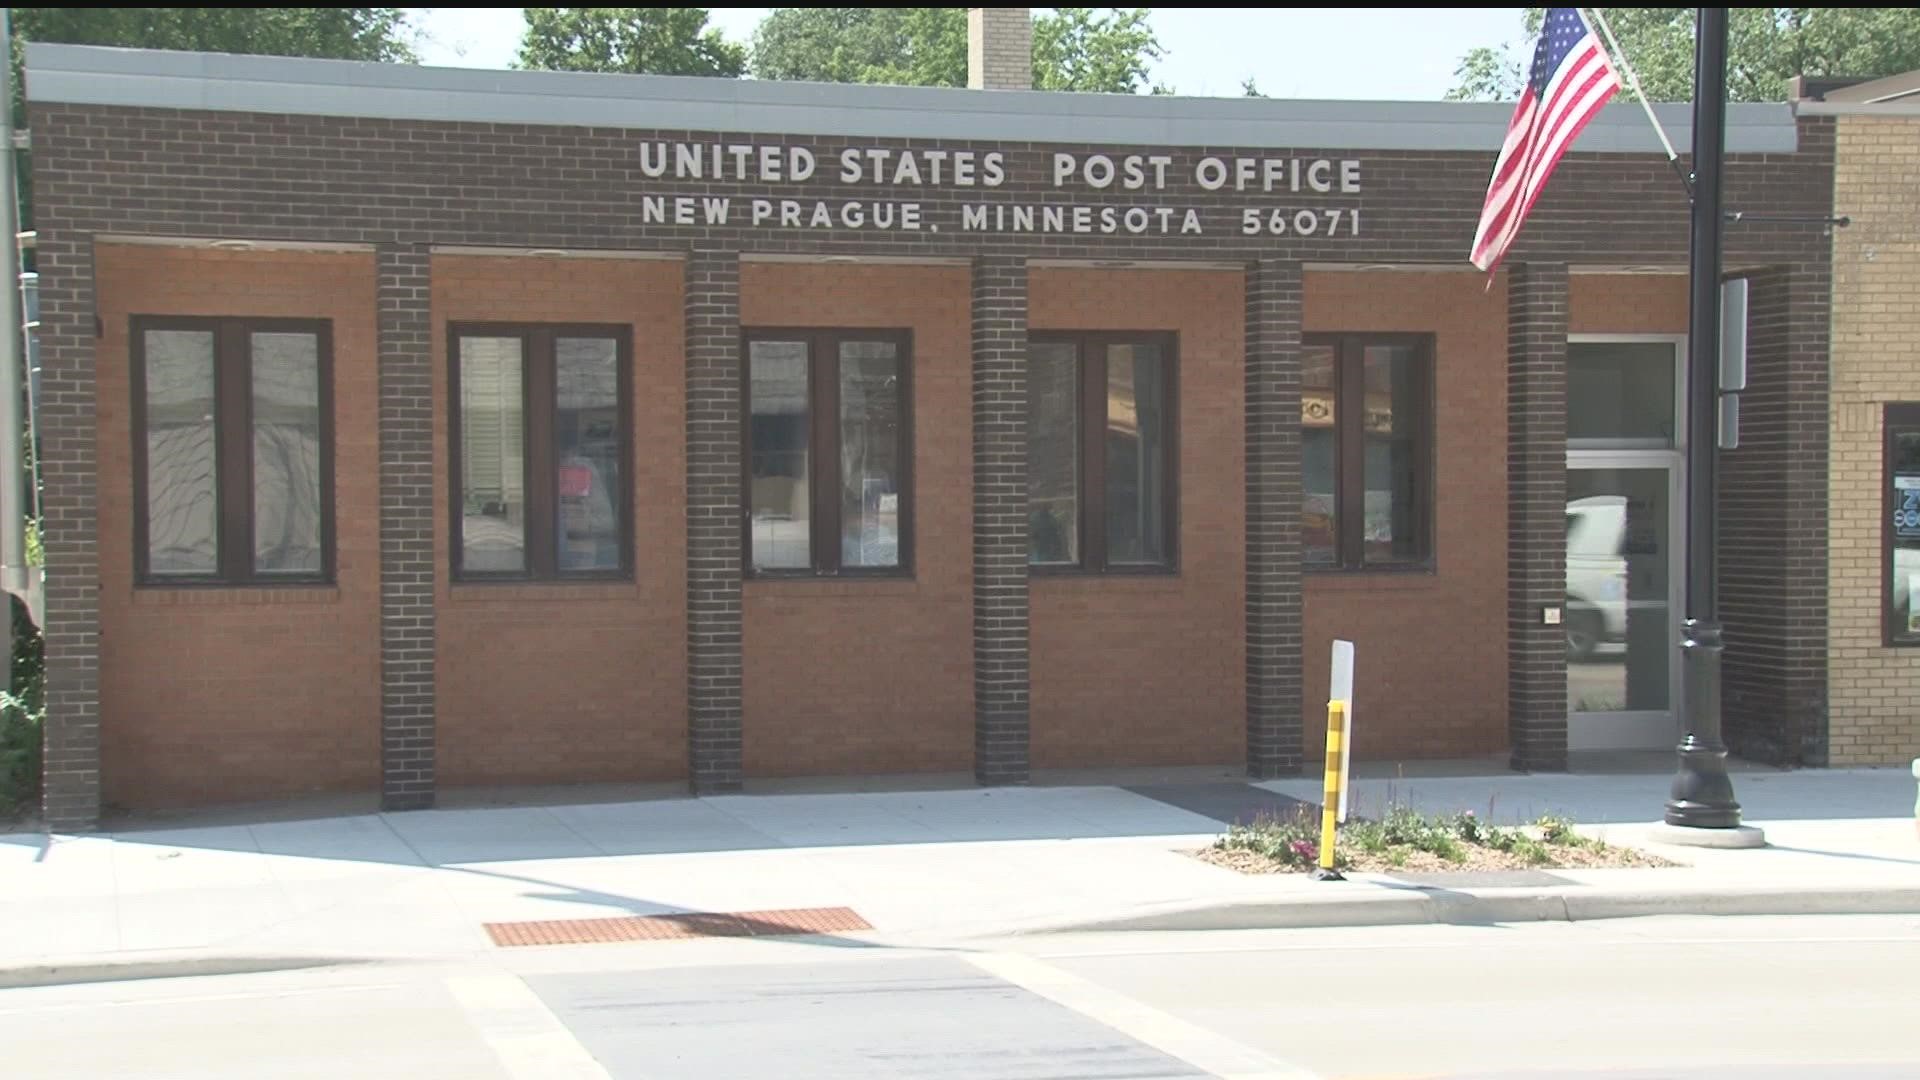 Residents, officials and Rep. Angie Craig attended a meeting to discuss the health and safety concerns at the post office in New Prague.